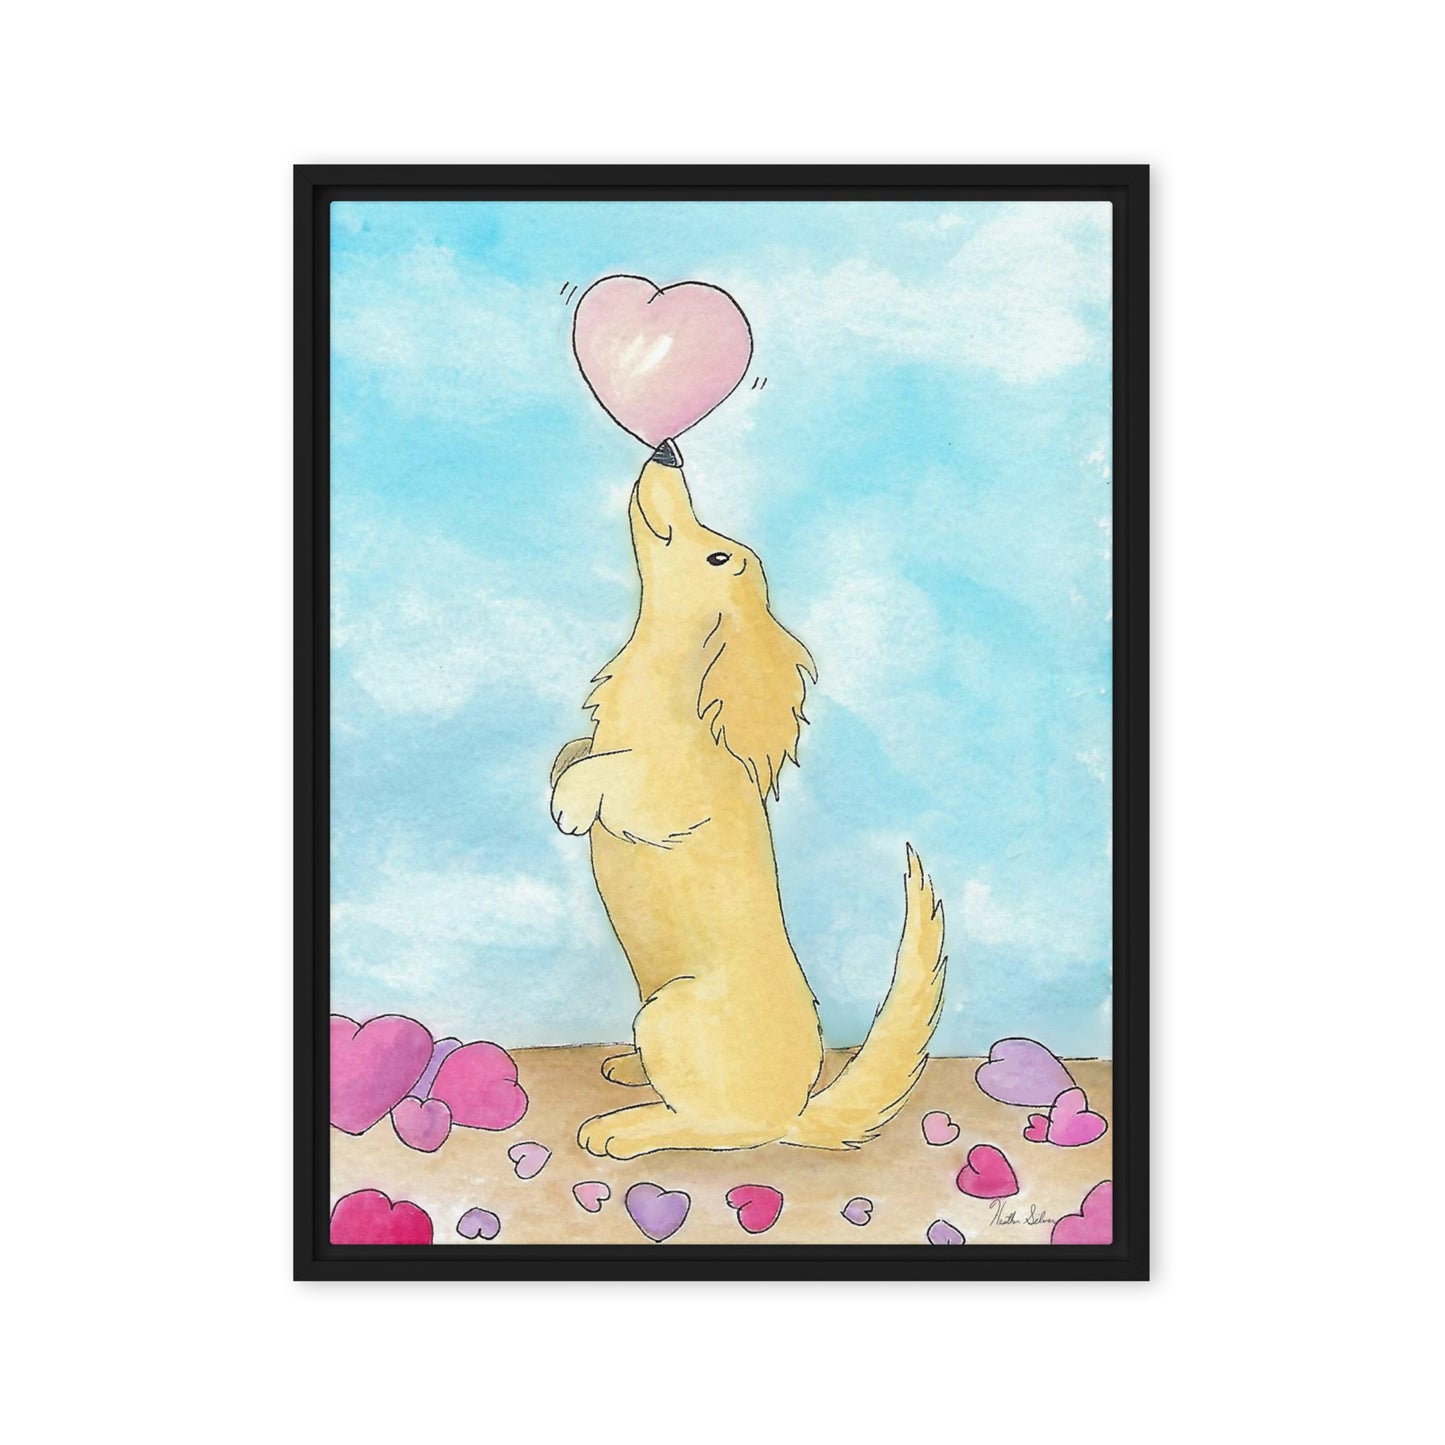 24 by 32 inch framed canvas Puppy Love print. The canvas is in a black pine wood frame.